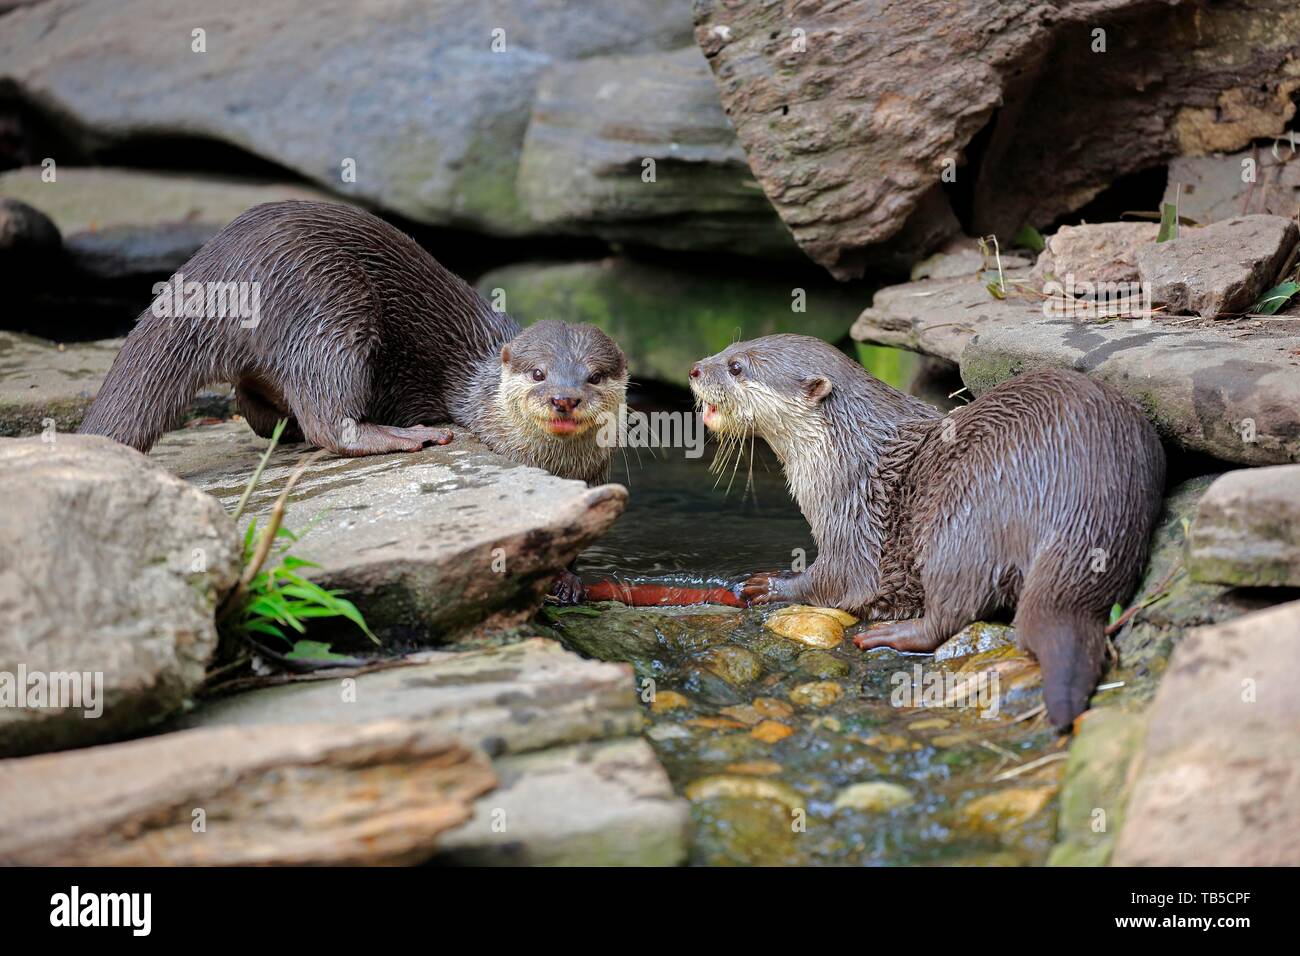 Oriental small-clawed otter (Amblonyx cinerea), adult, two otters on the water, captive, Adelaide, South Australia, Australia Stock Photo